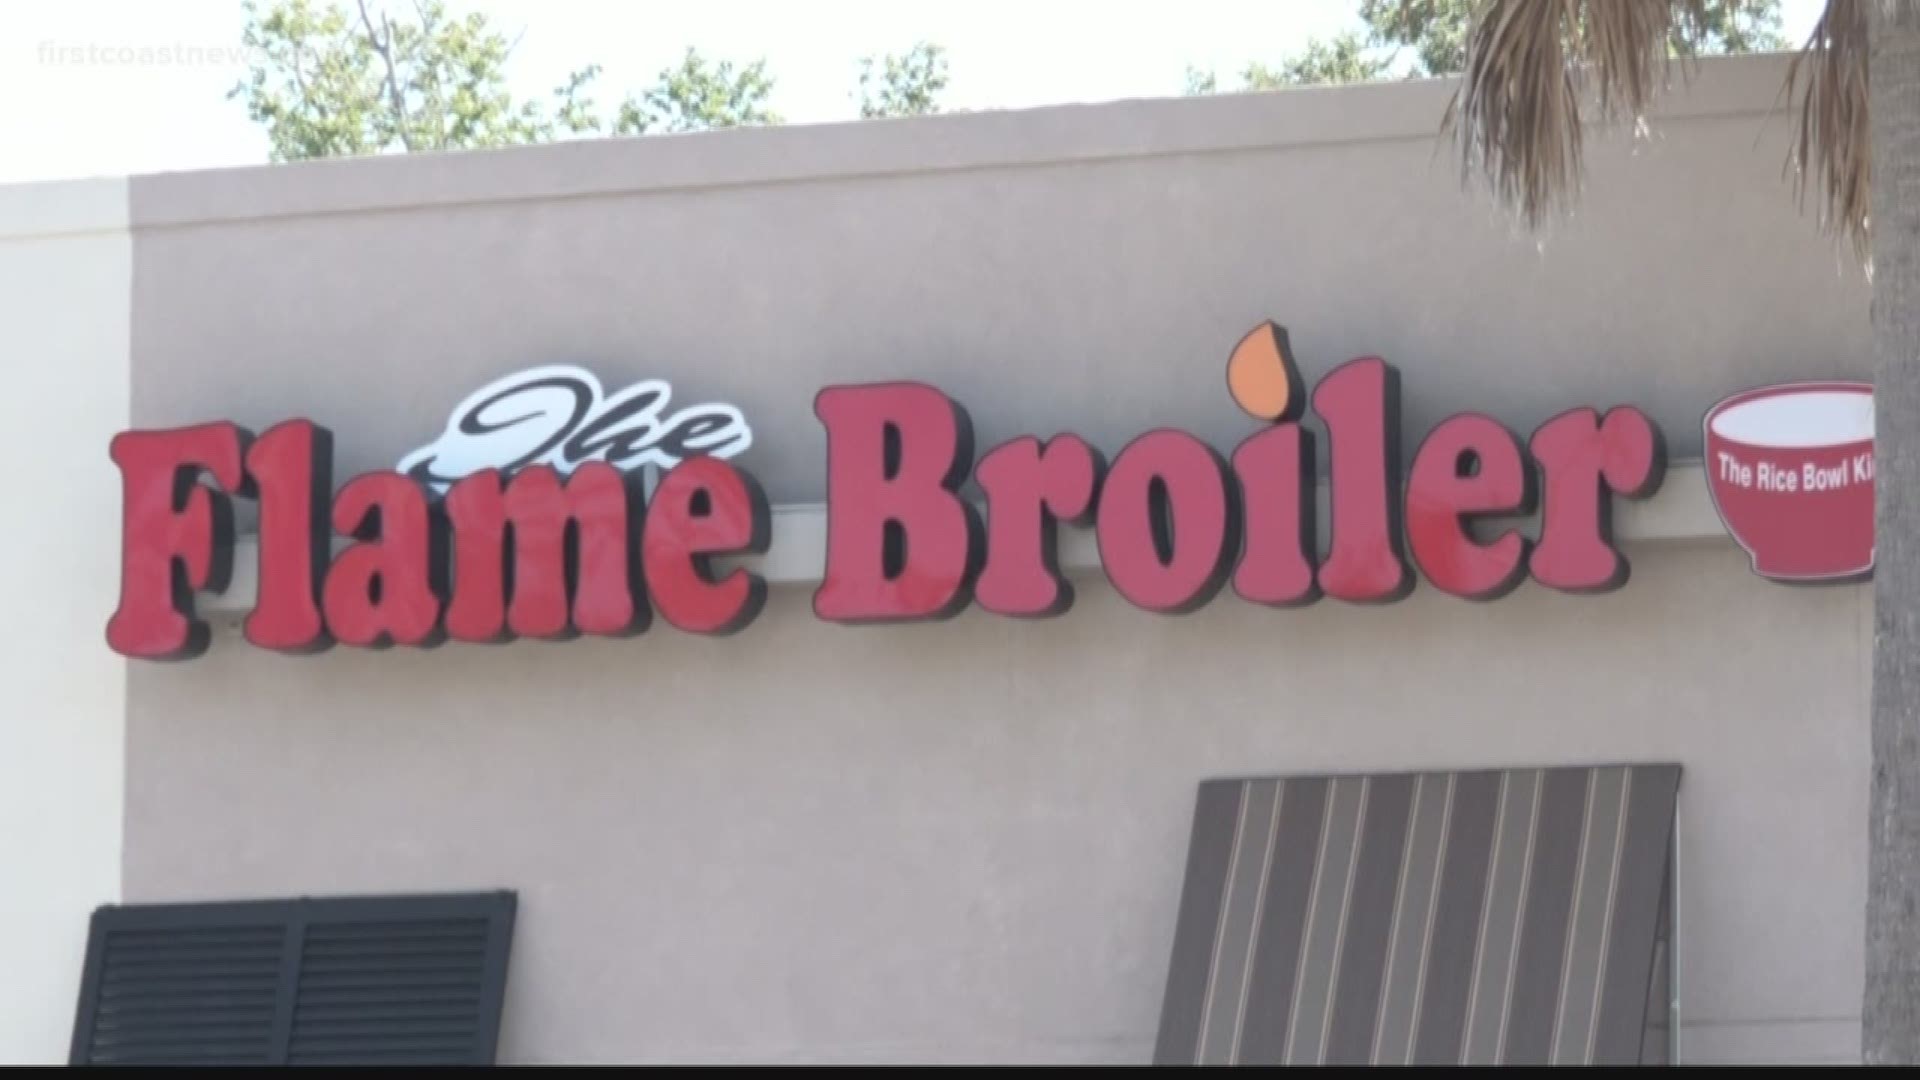 The Flame Broiler's San Marco location will be closed for repairs over the next four to six weeks due to a fire that broke out Friday evening during a burglary.